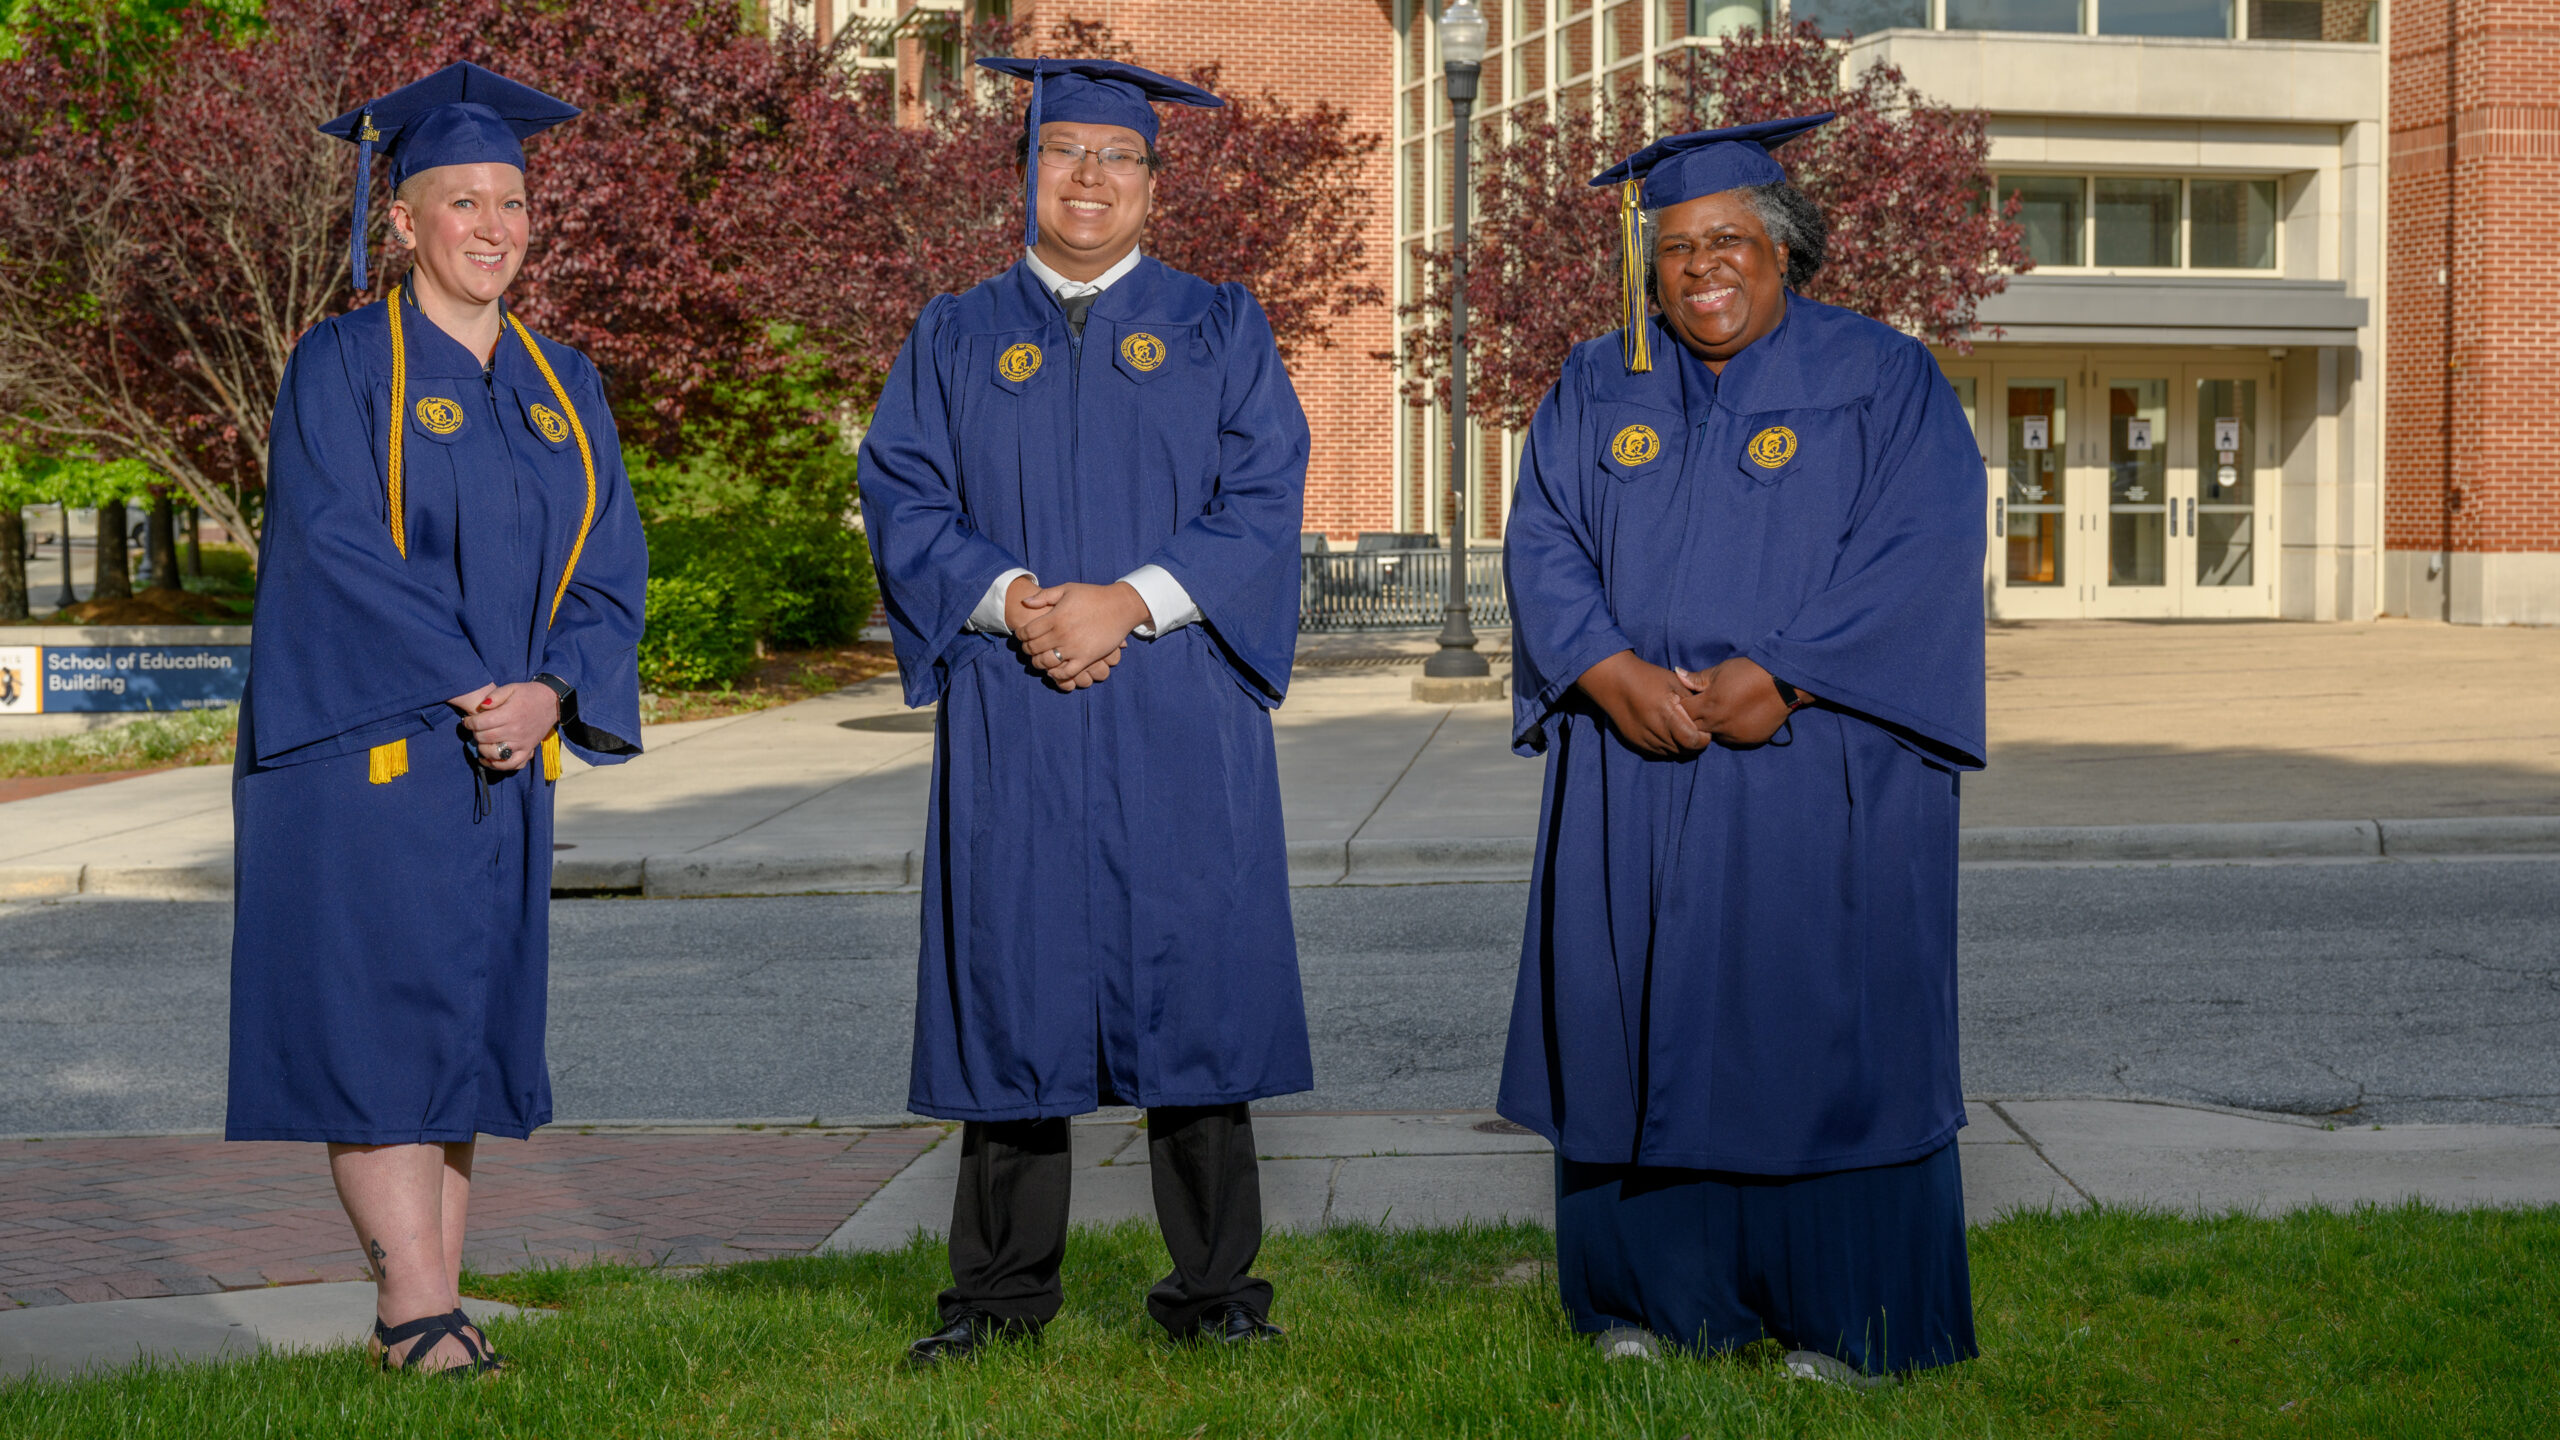 Jessica Jeffus, Jimmy Vang, and Lynnette Pitts pose in their cap and gown in front of the School of Education Building